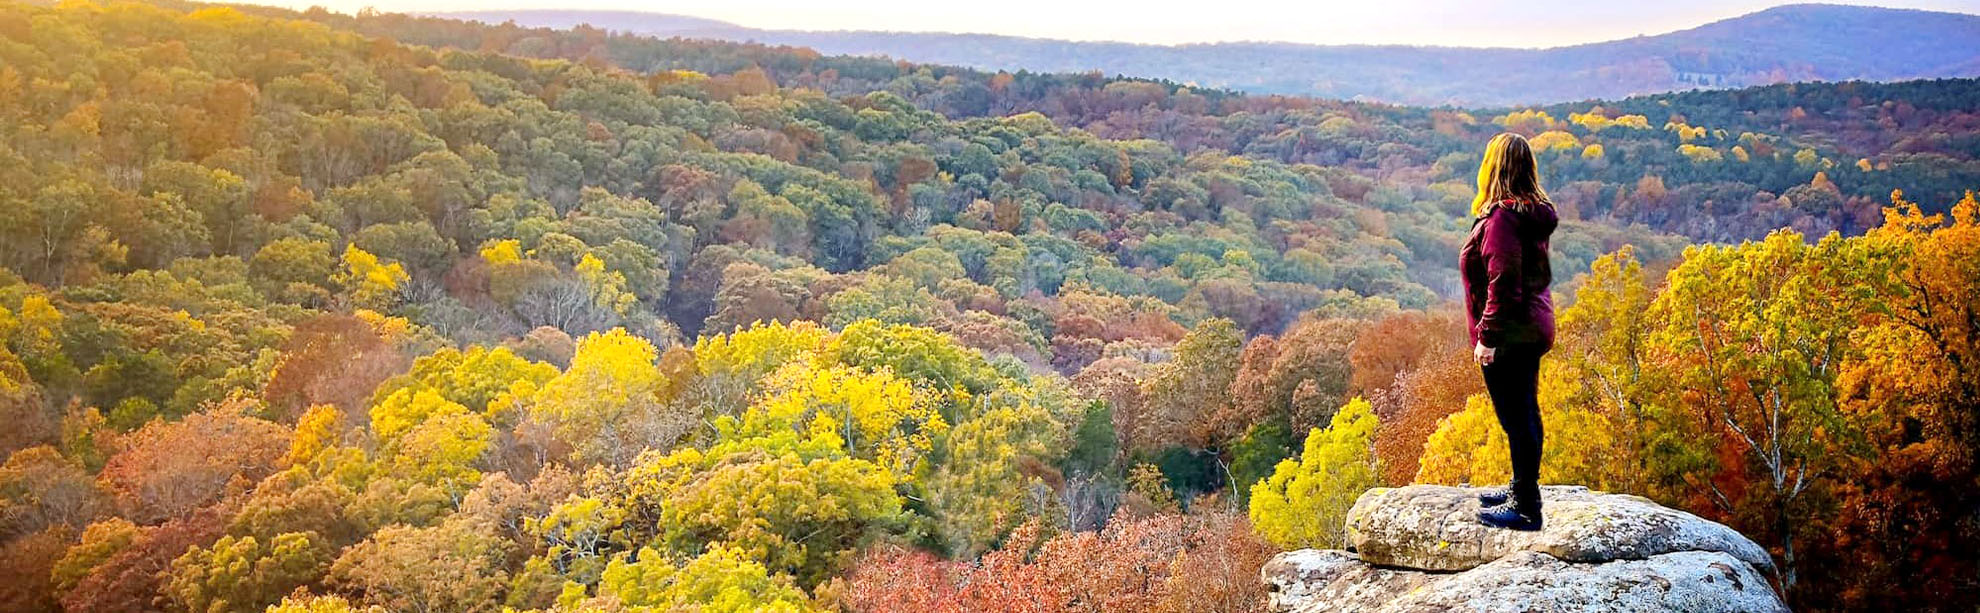 A view of trees in the fall colors from above.